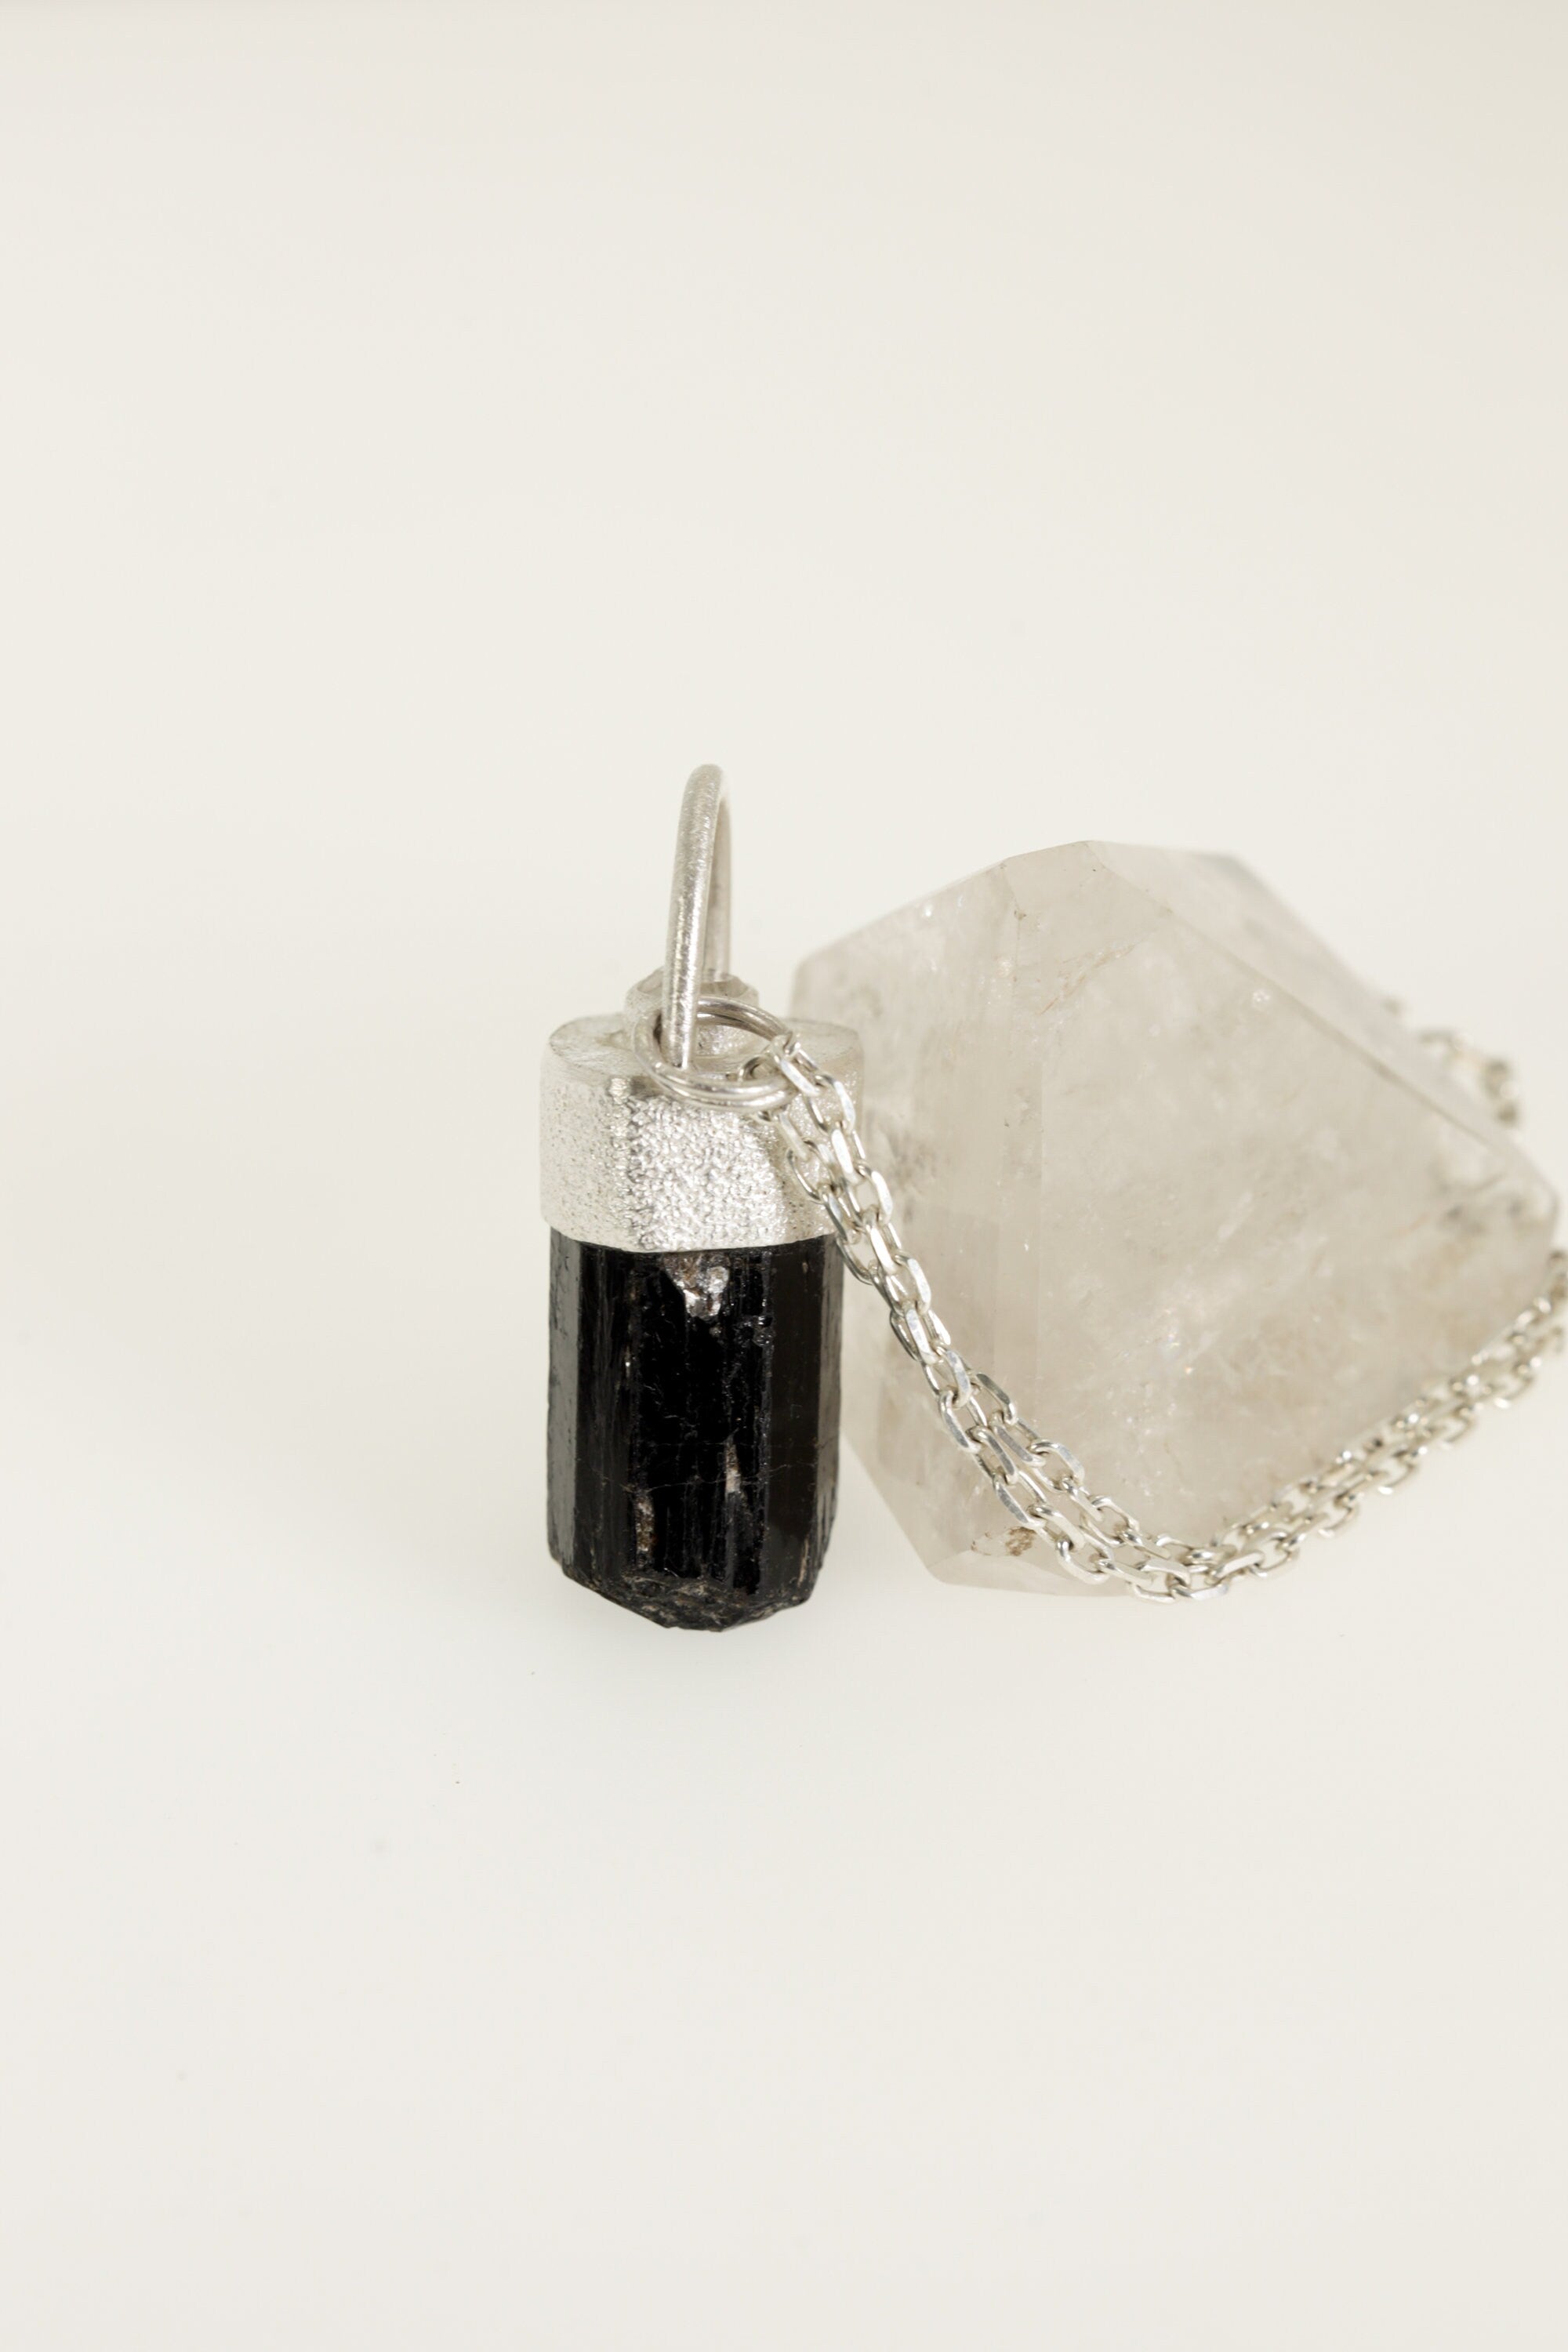 Earthen Brilliance: Sterling Silver Pendant with Himalayan Terminated Brown Dravite Tourmaline and Diamond - Sand Texture Finish - NO/04